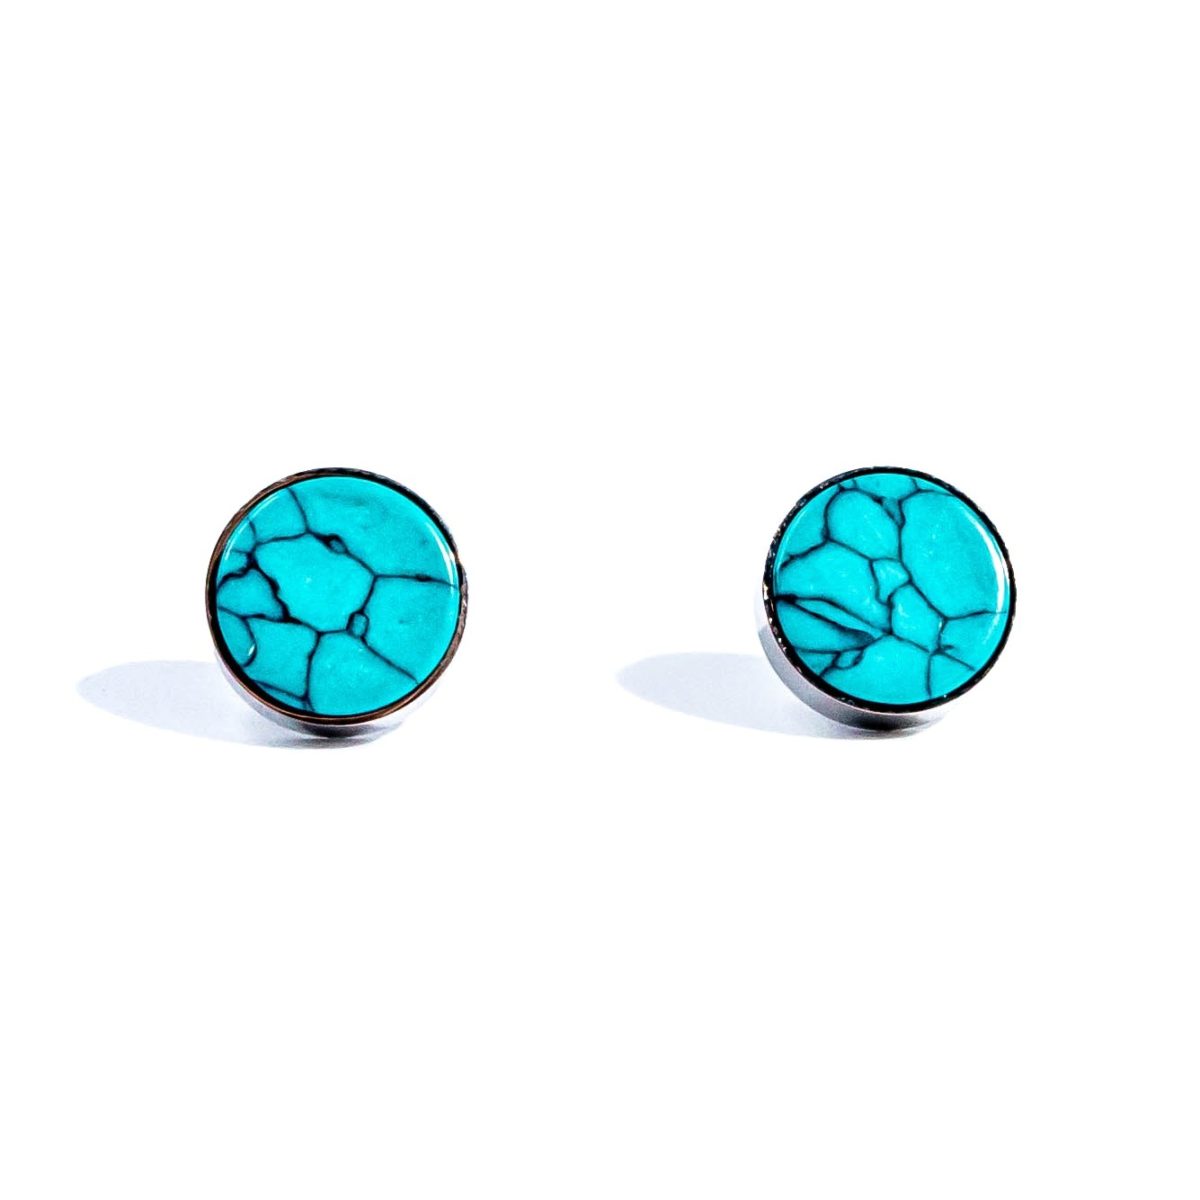 https://m.clubbella.co/product/ethan-turquoise-gemstone/ Ethan (6)